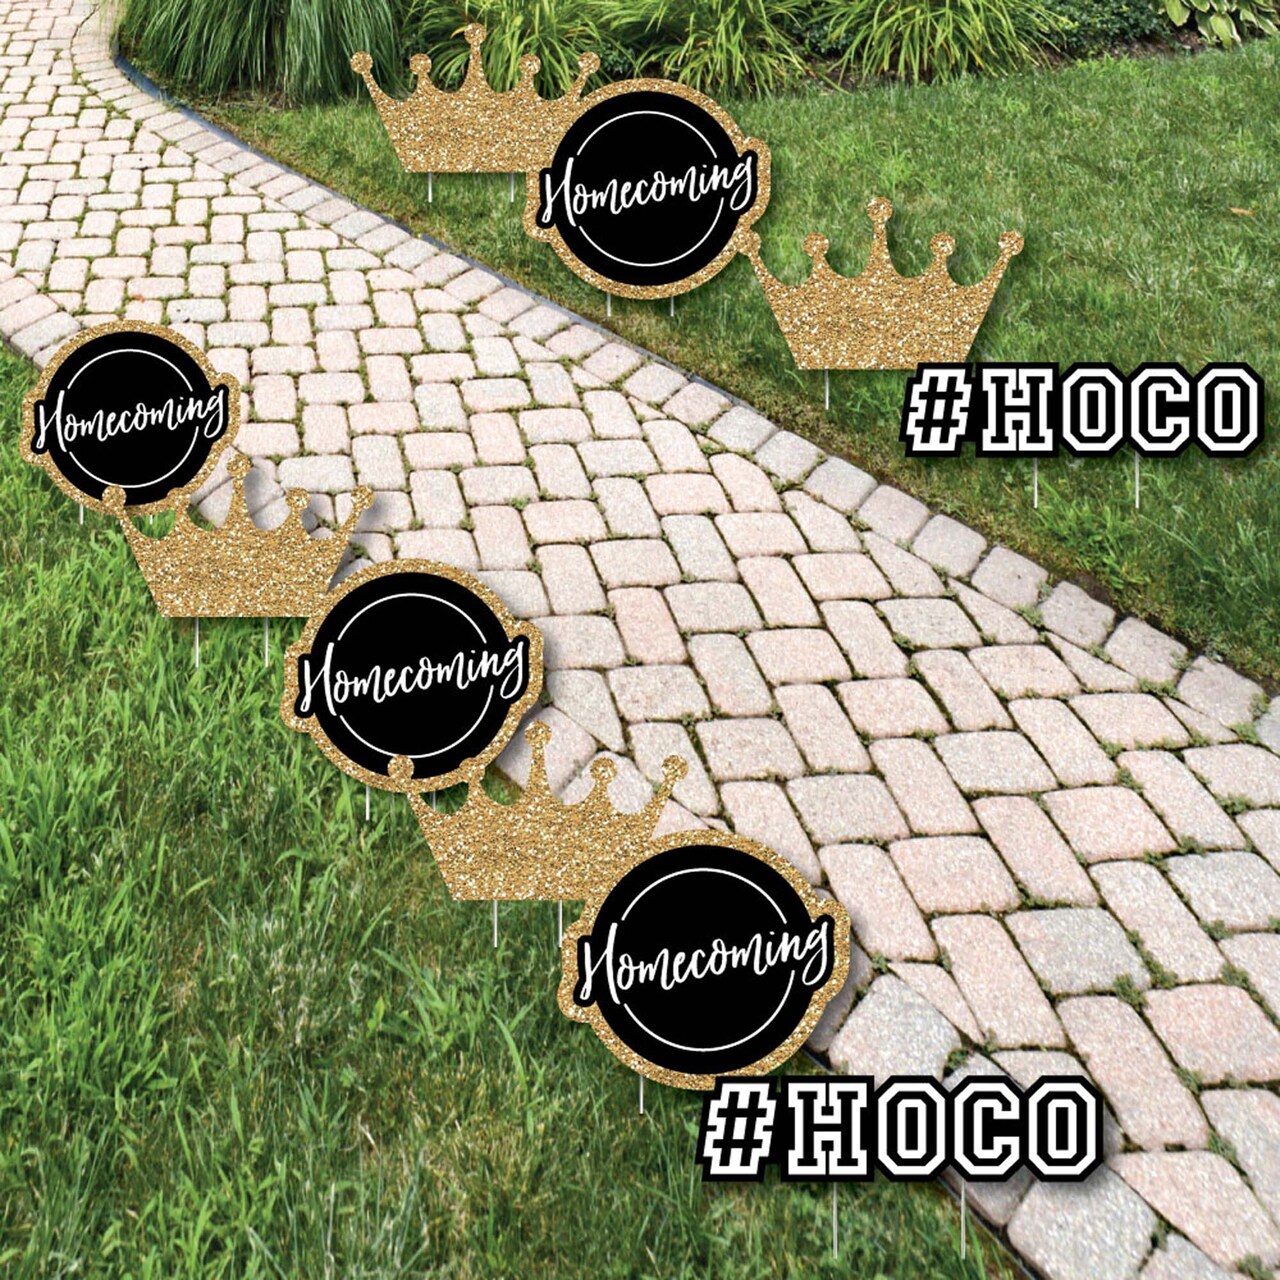 Big Dot of Happiness Hoco Dance - Crown Lawn Decorations - Outdoor Homecoming Yard Decorations - 10 Piece